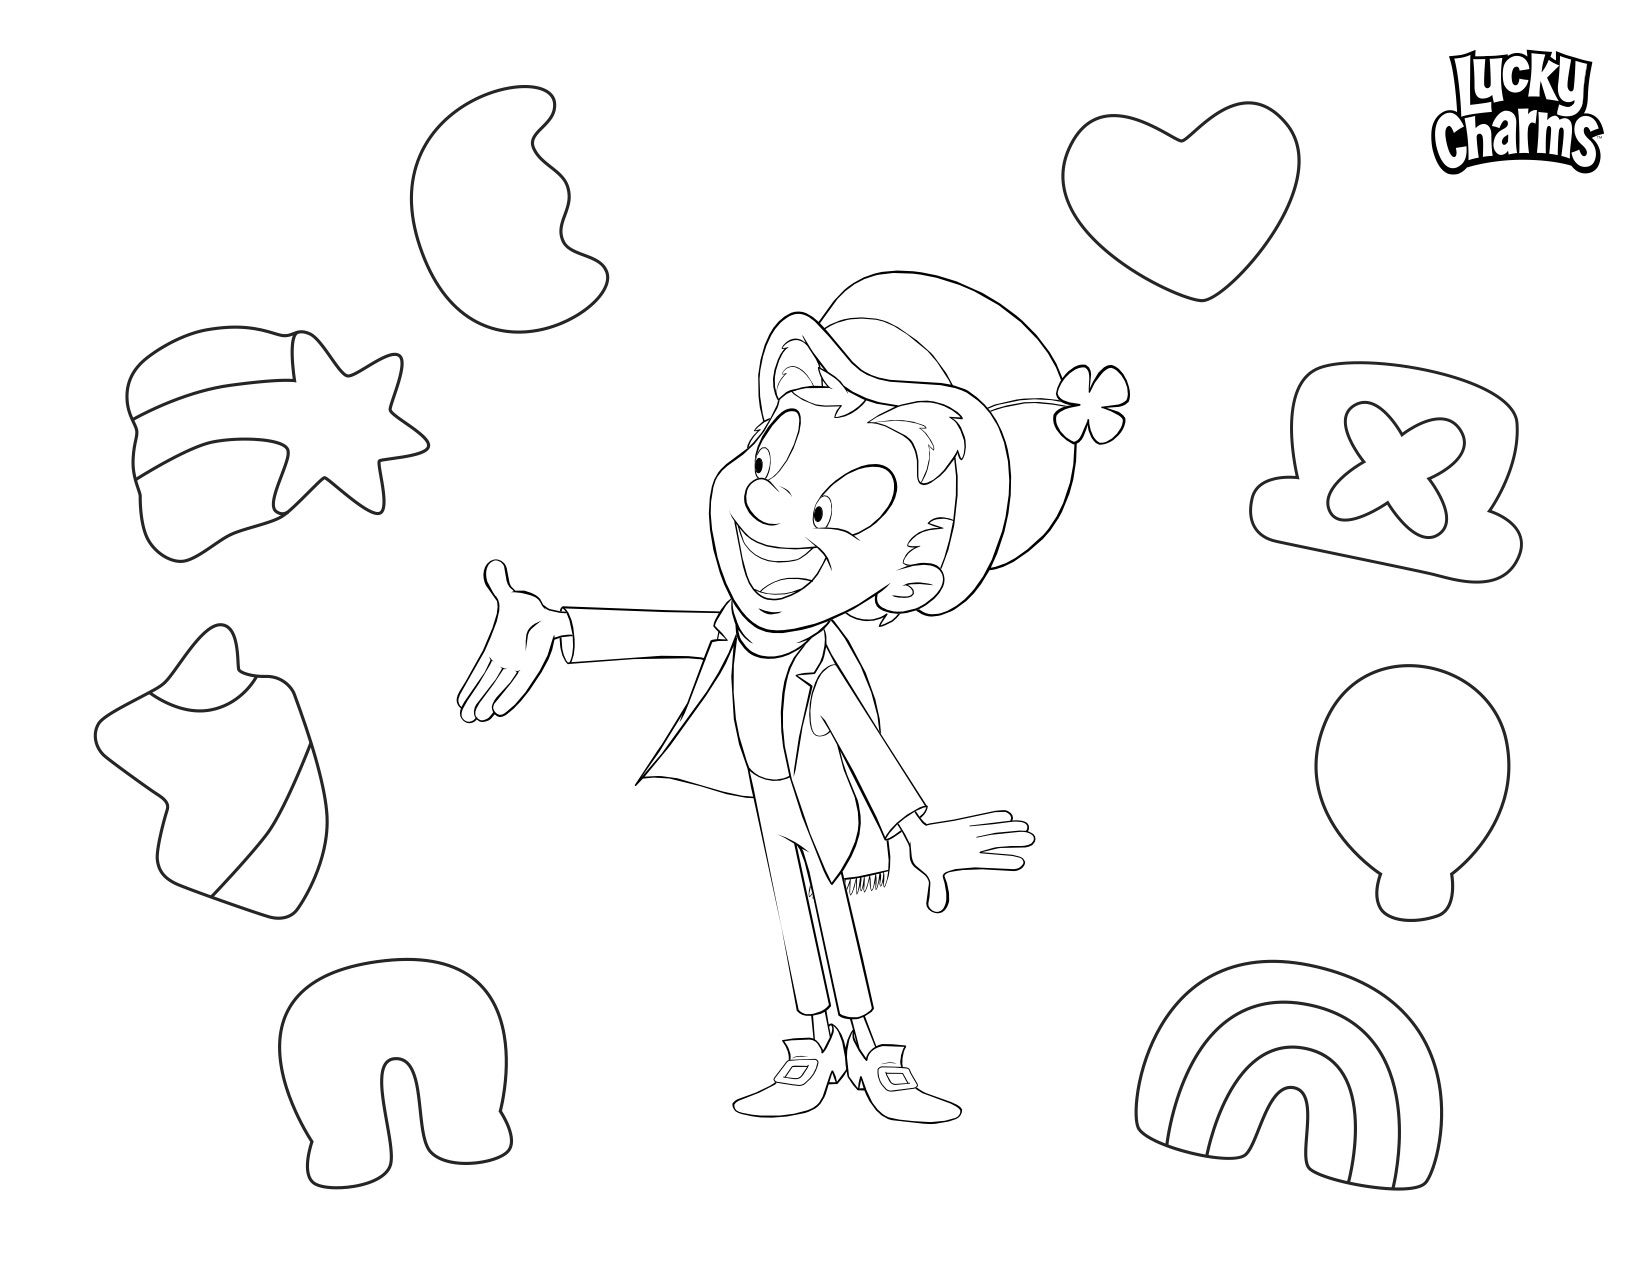 Lucky charms cut outs st patrick day activities coloring pages lucky charm